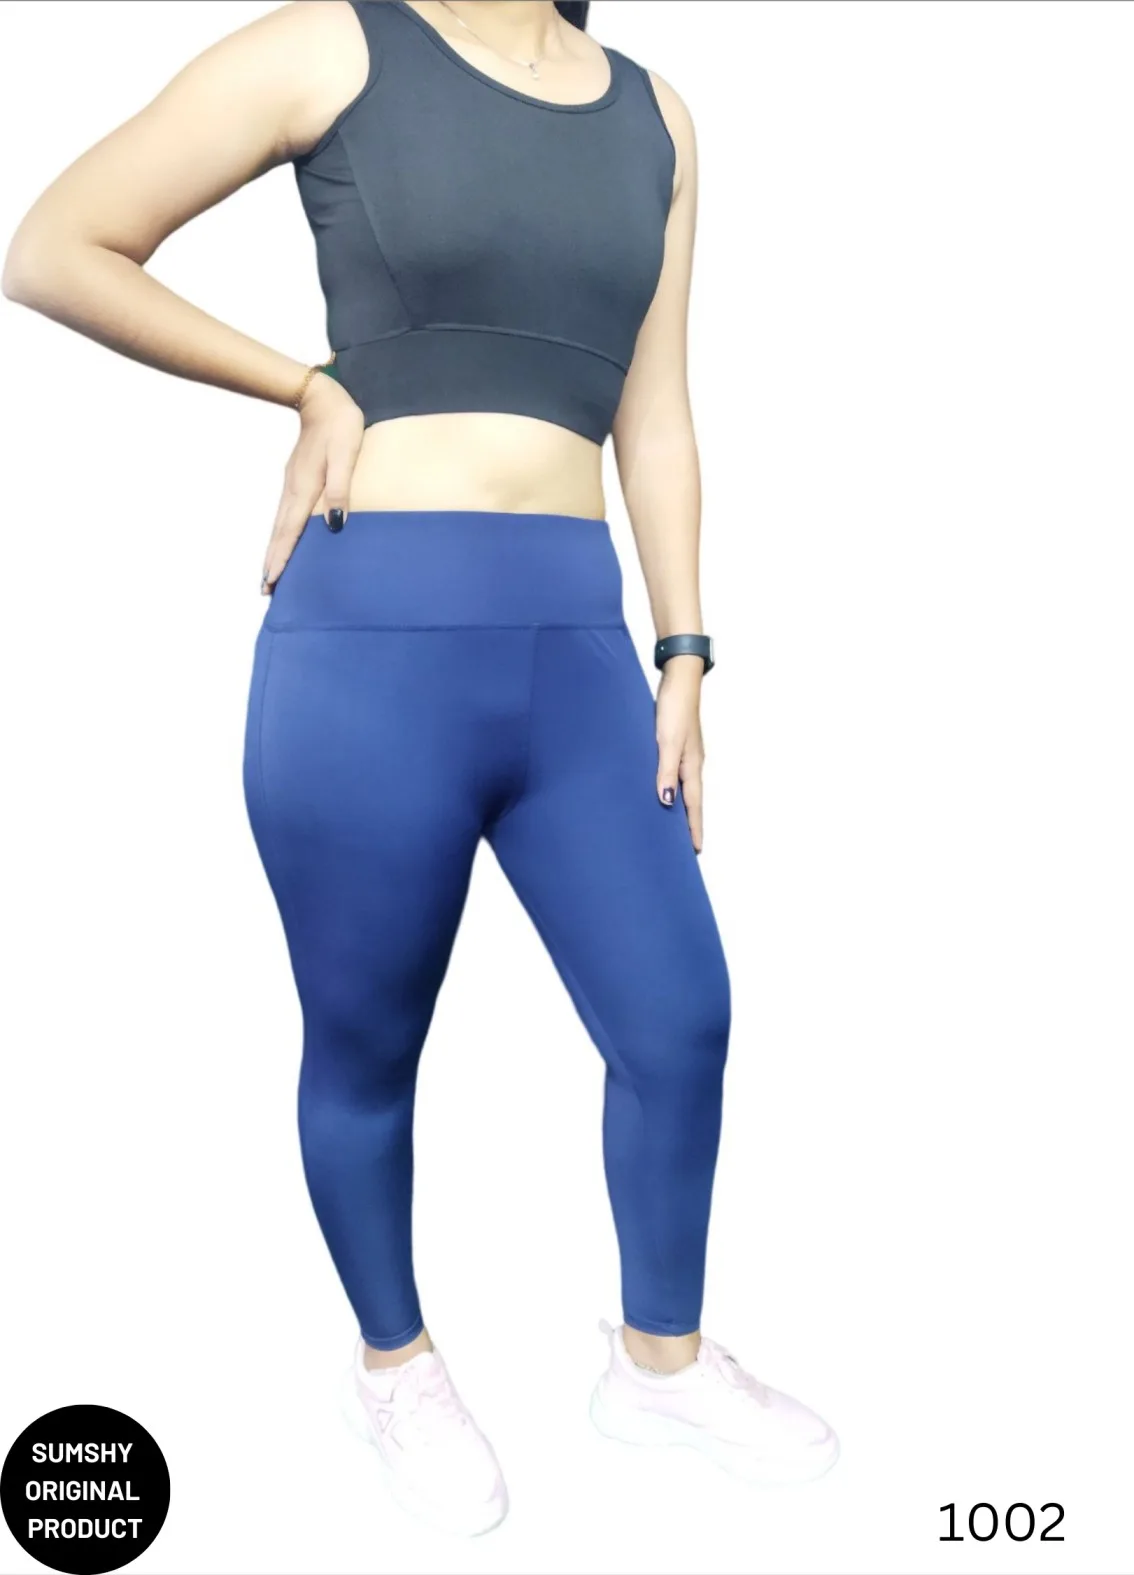 Buy ULTRA HIGH WAIST GREY YOGA PANTS for Women Online in India